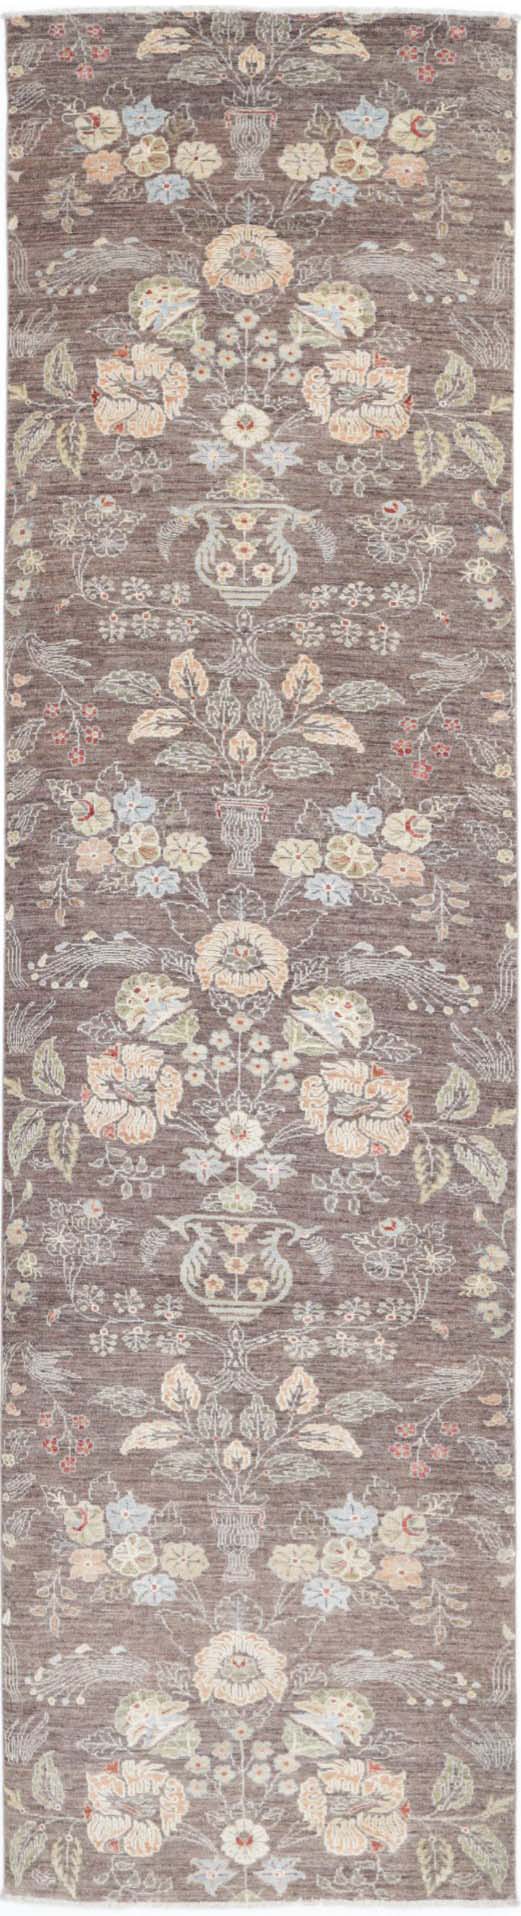 Hand Knotted Artemix Wool Rug - 2'9'' x 11'8''